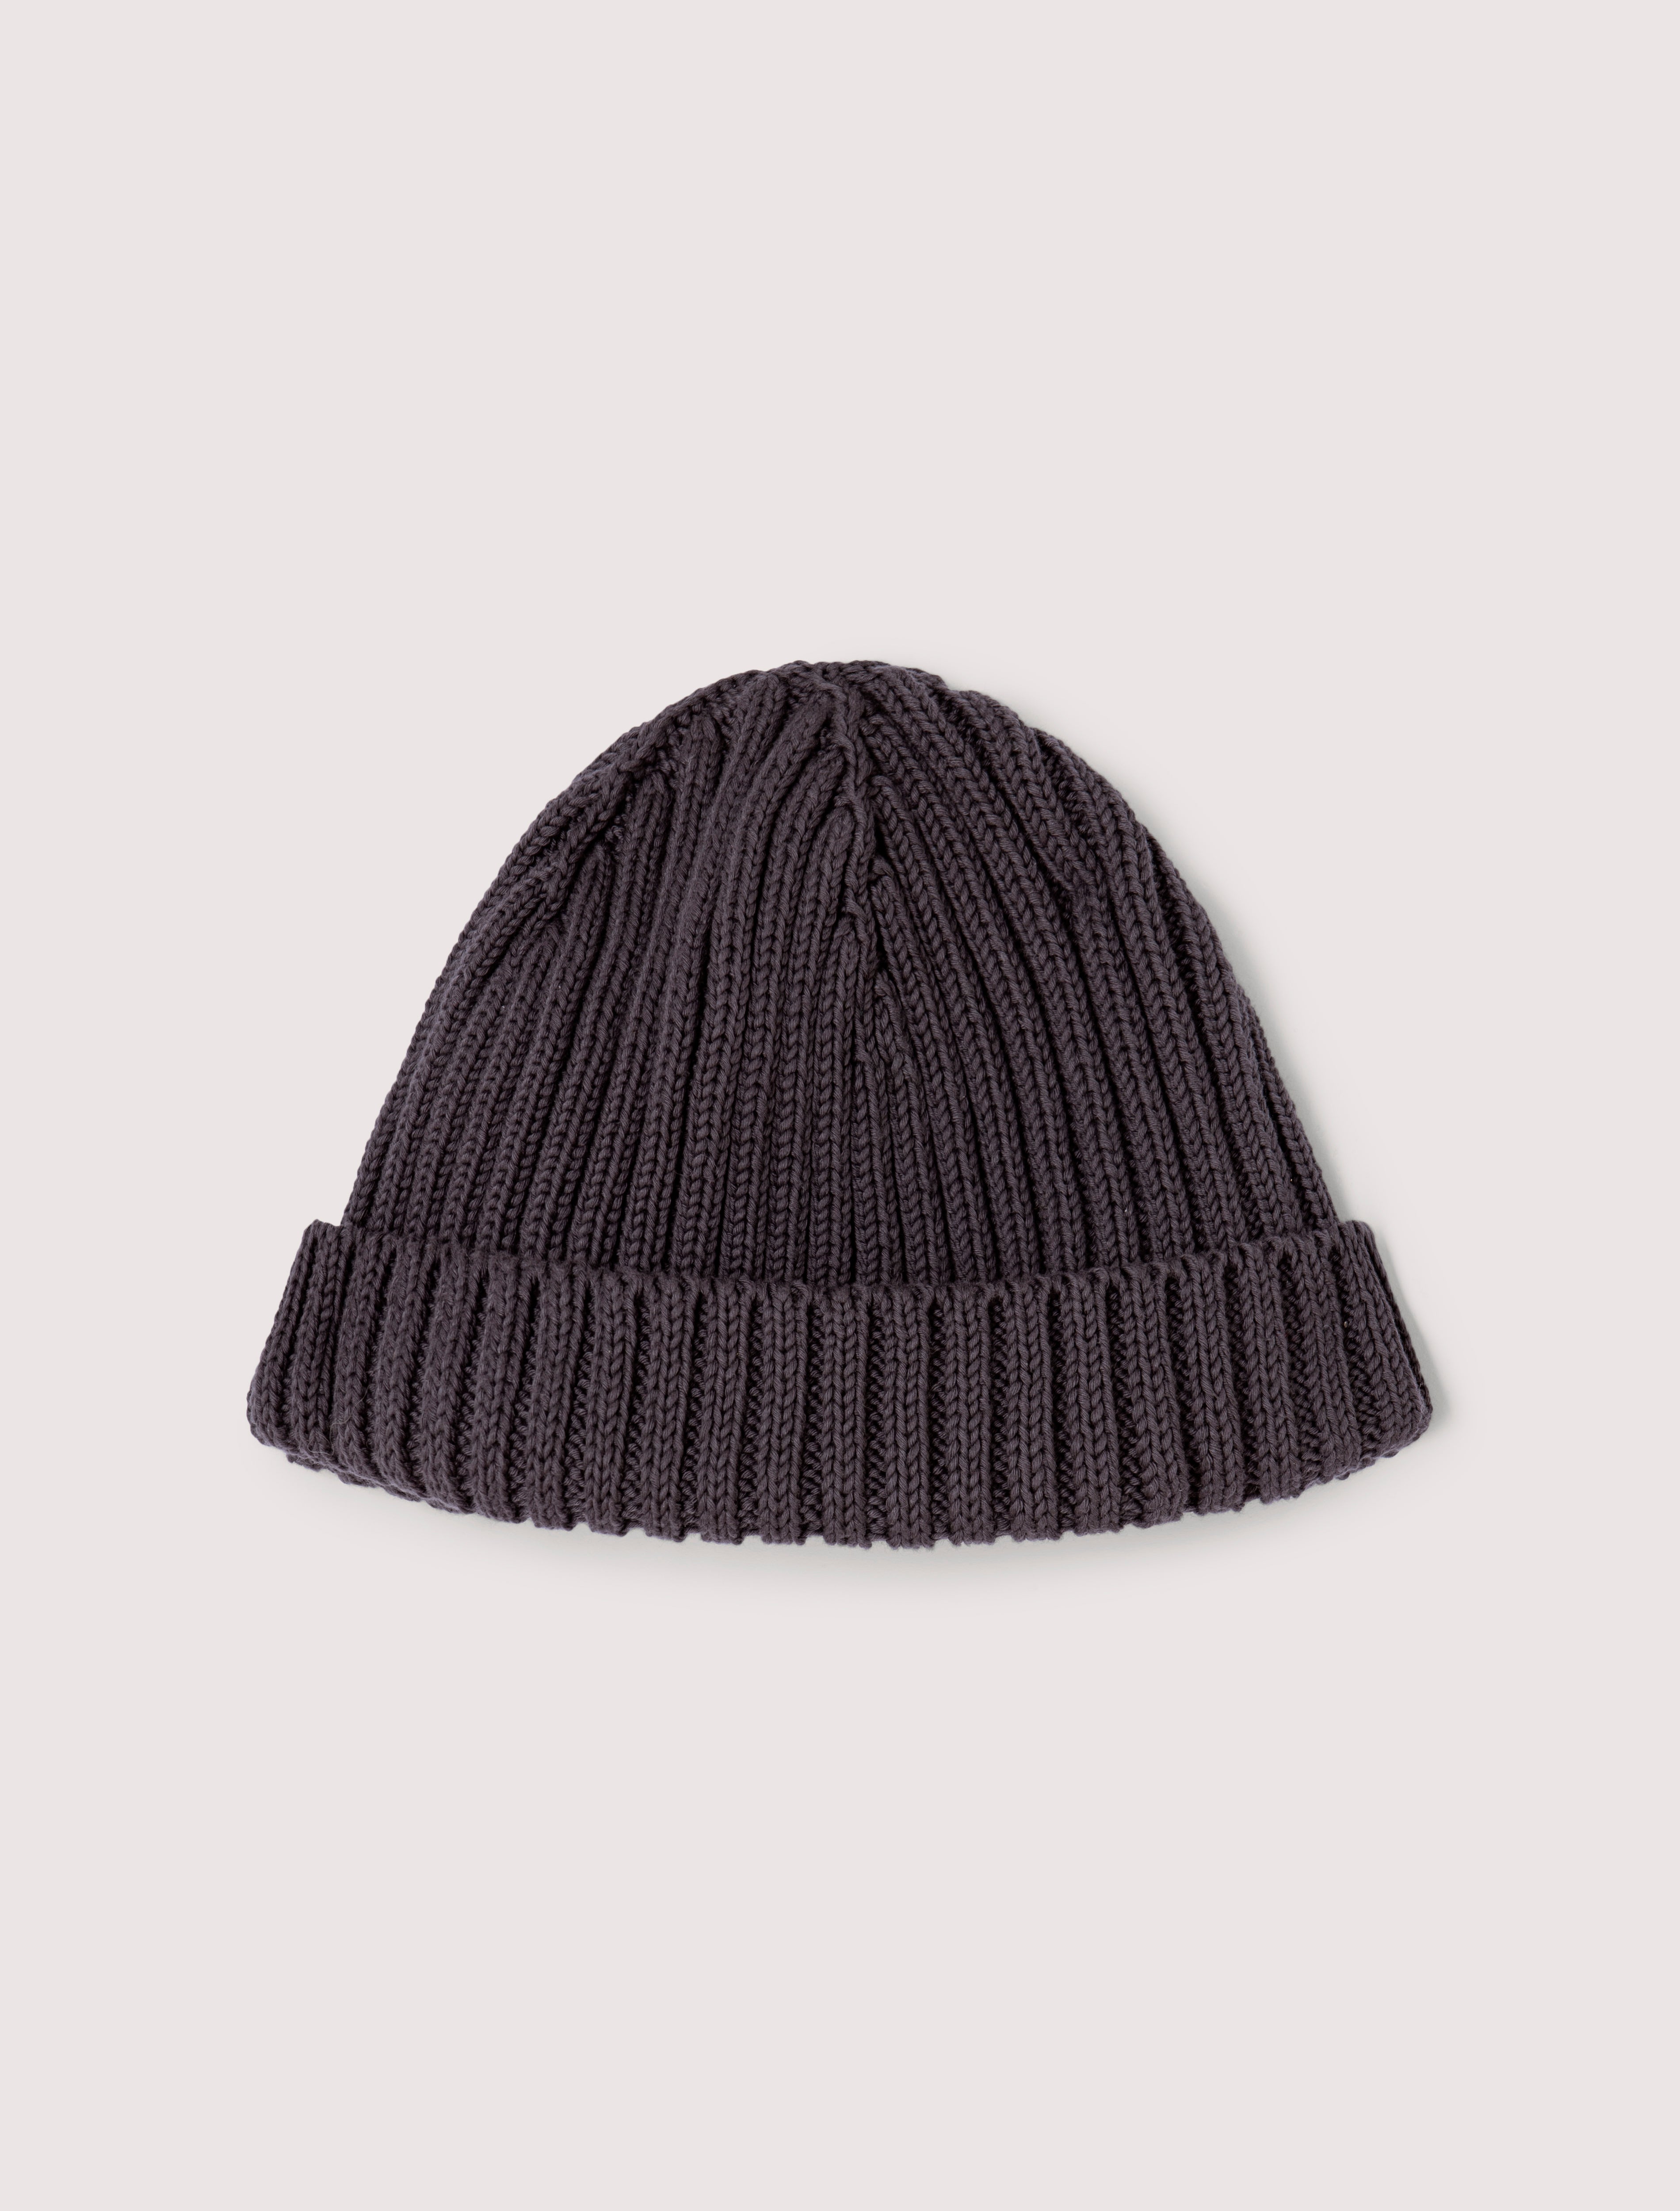 CARRER_ORIA KNITTED BEANIE IN GREY